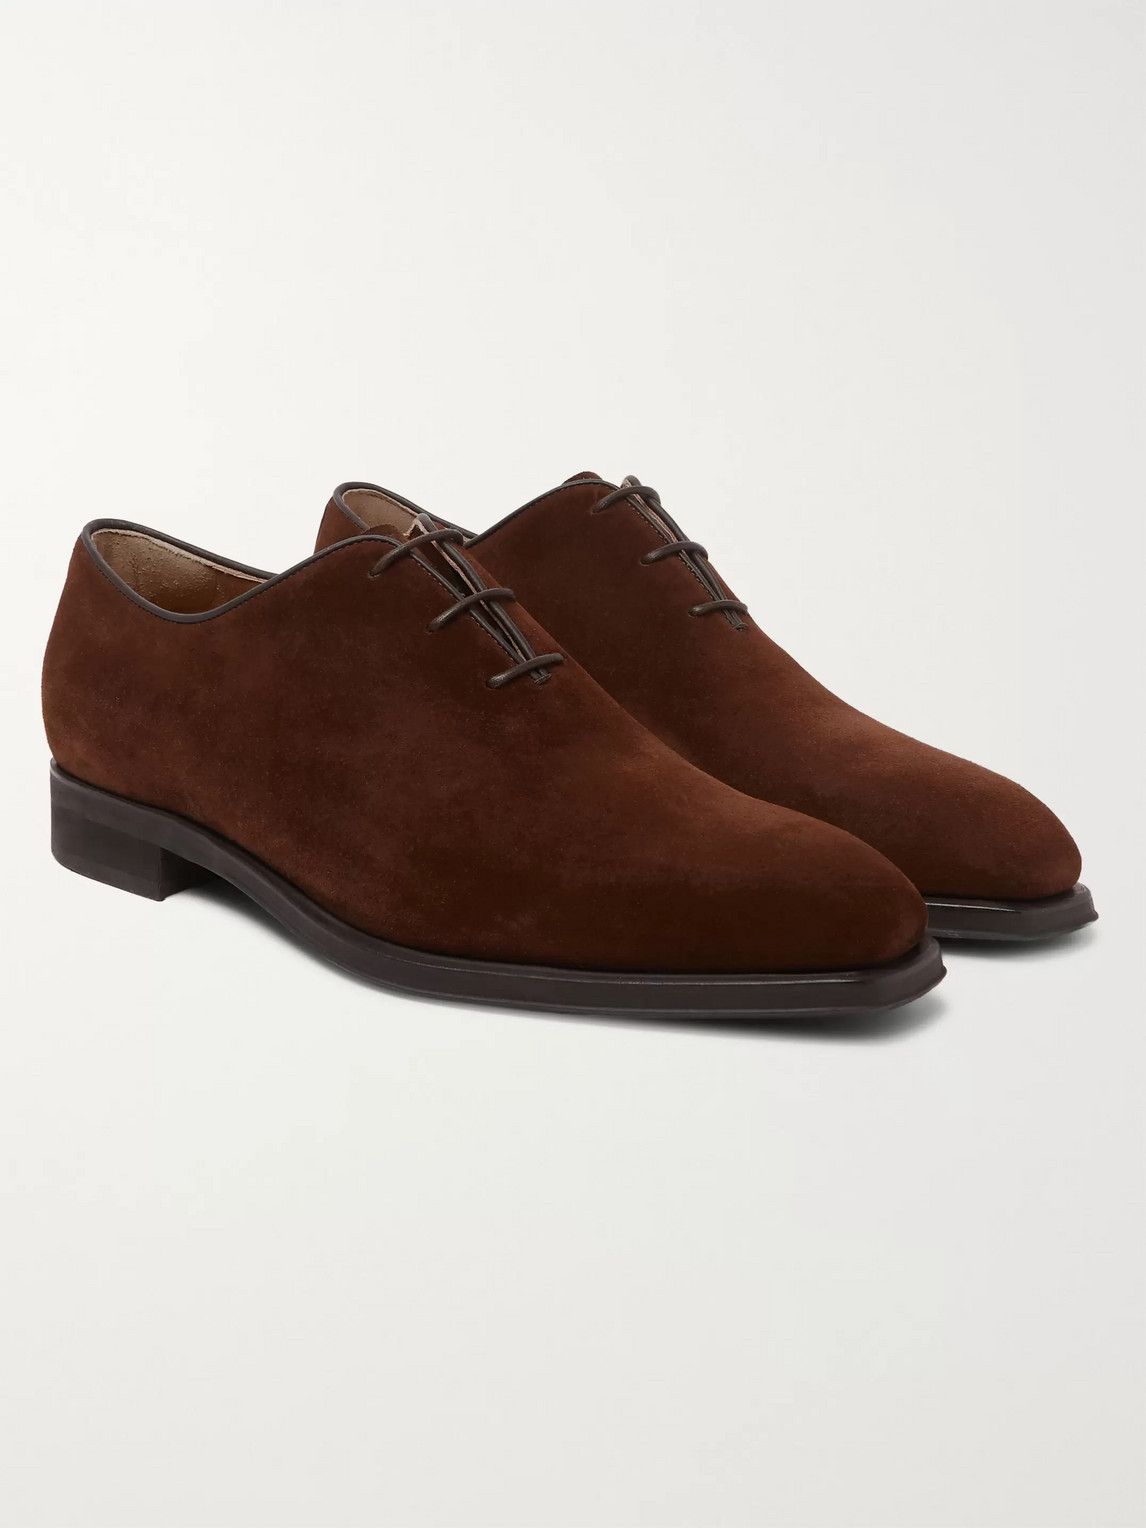 Berluti - Alessandro Infini Leather-Trimmed Suede Oxford Shoes